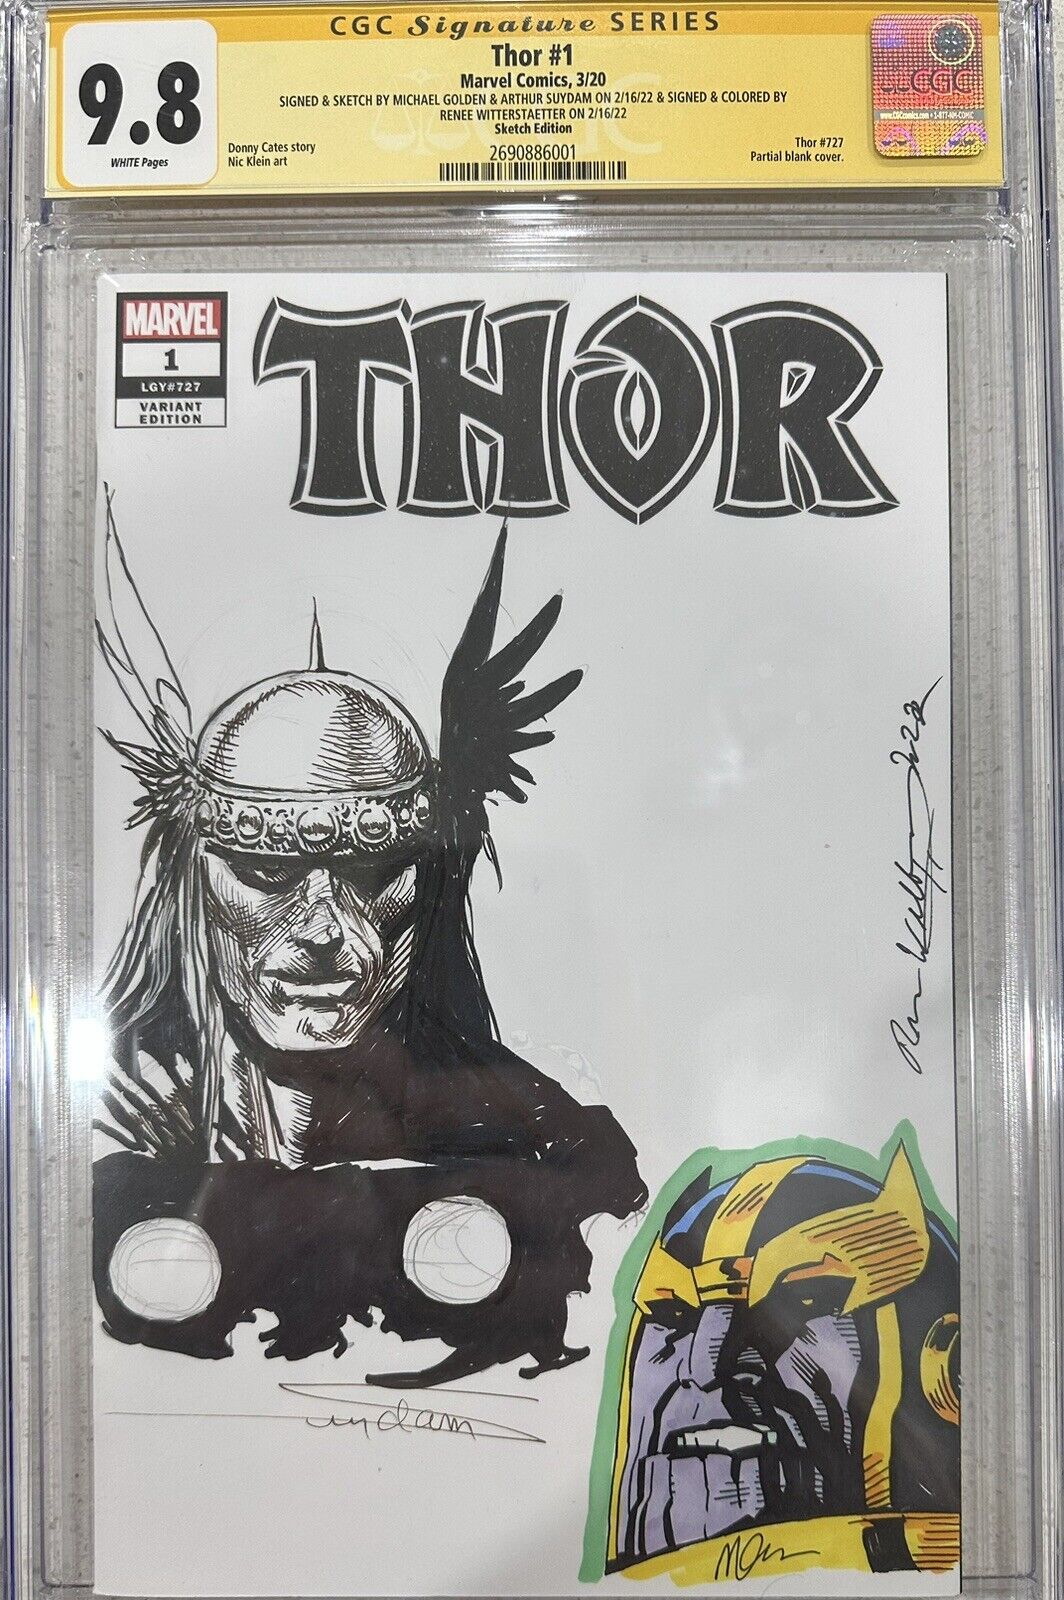 Thor #1 CGC 9.8 (3x Signed/Sketched/Colored)